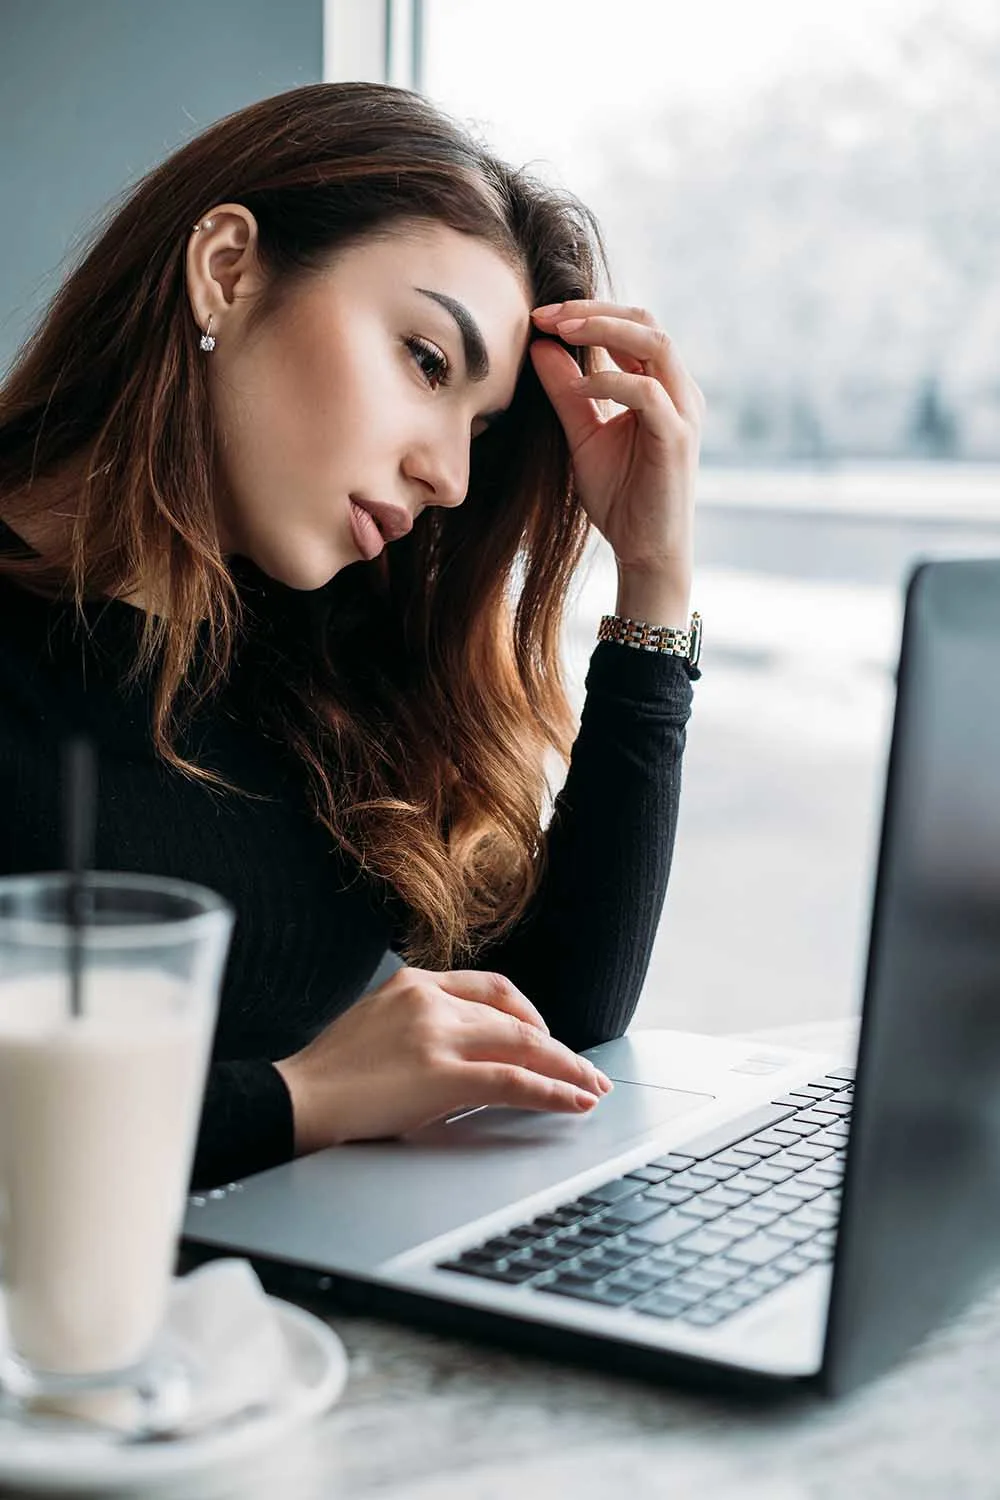 Working out what to do when you hate your job can be incredibly difficult. Until you find yourself a new job, here's how you can cope with a job you hate.